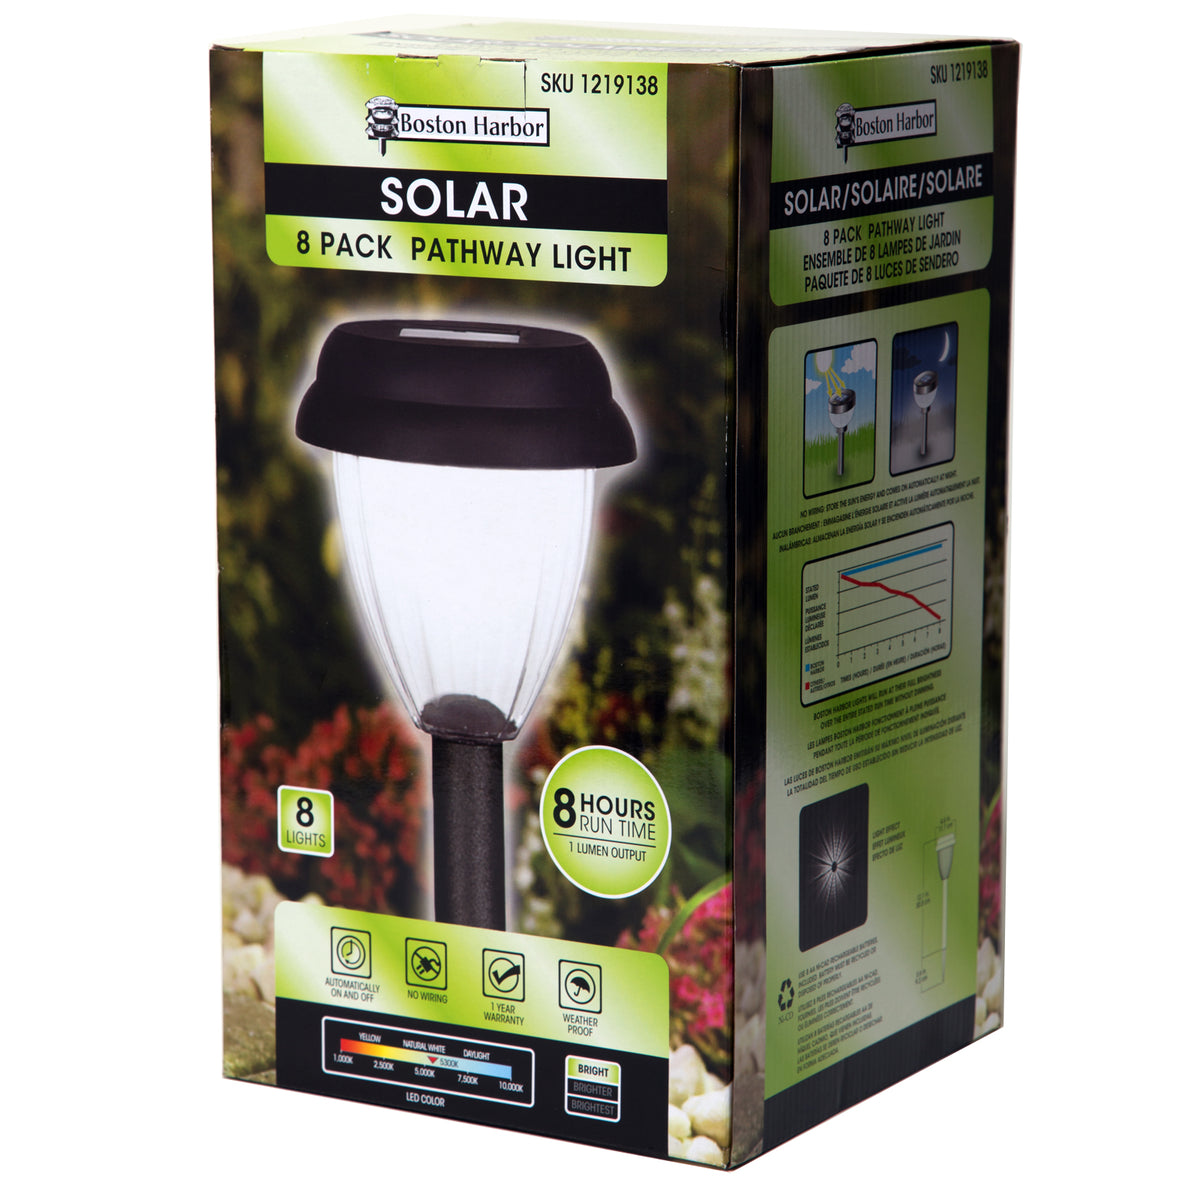 buy solar powered lights at cheap rate in bulk. wholesale & retail outdoor & lawn decor store.